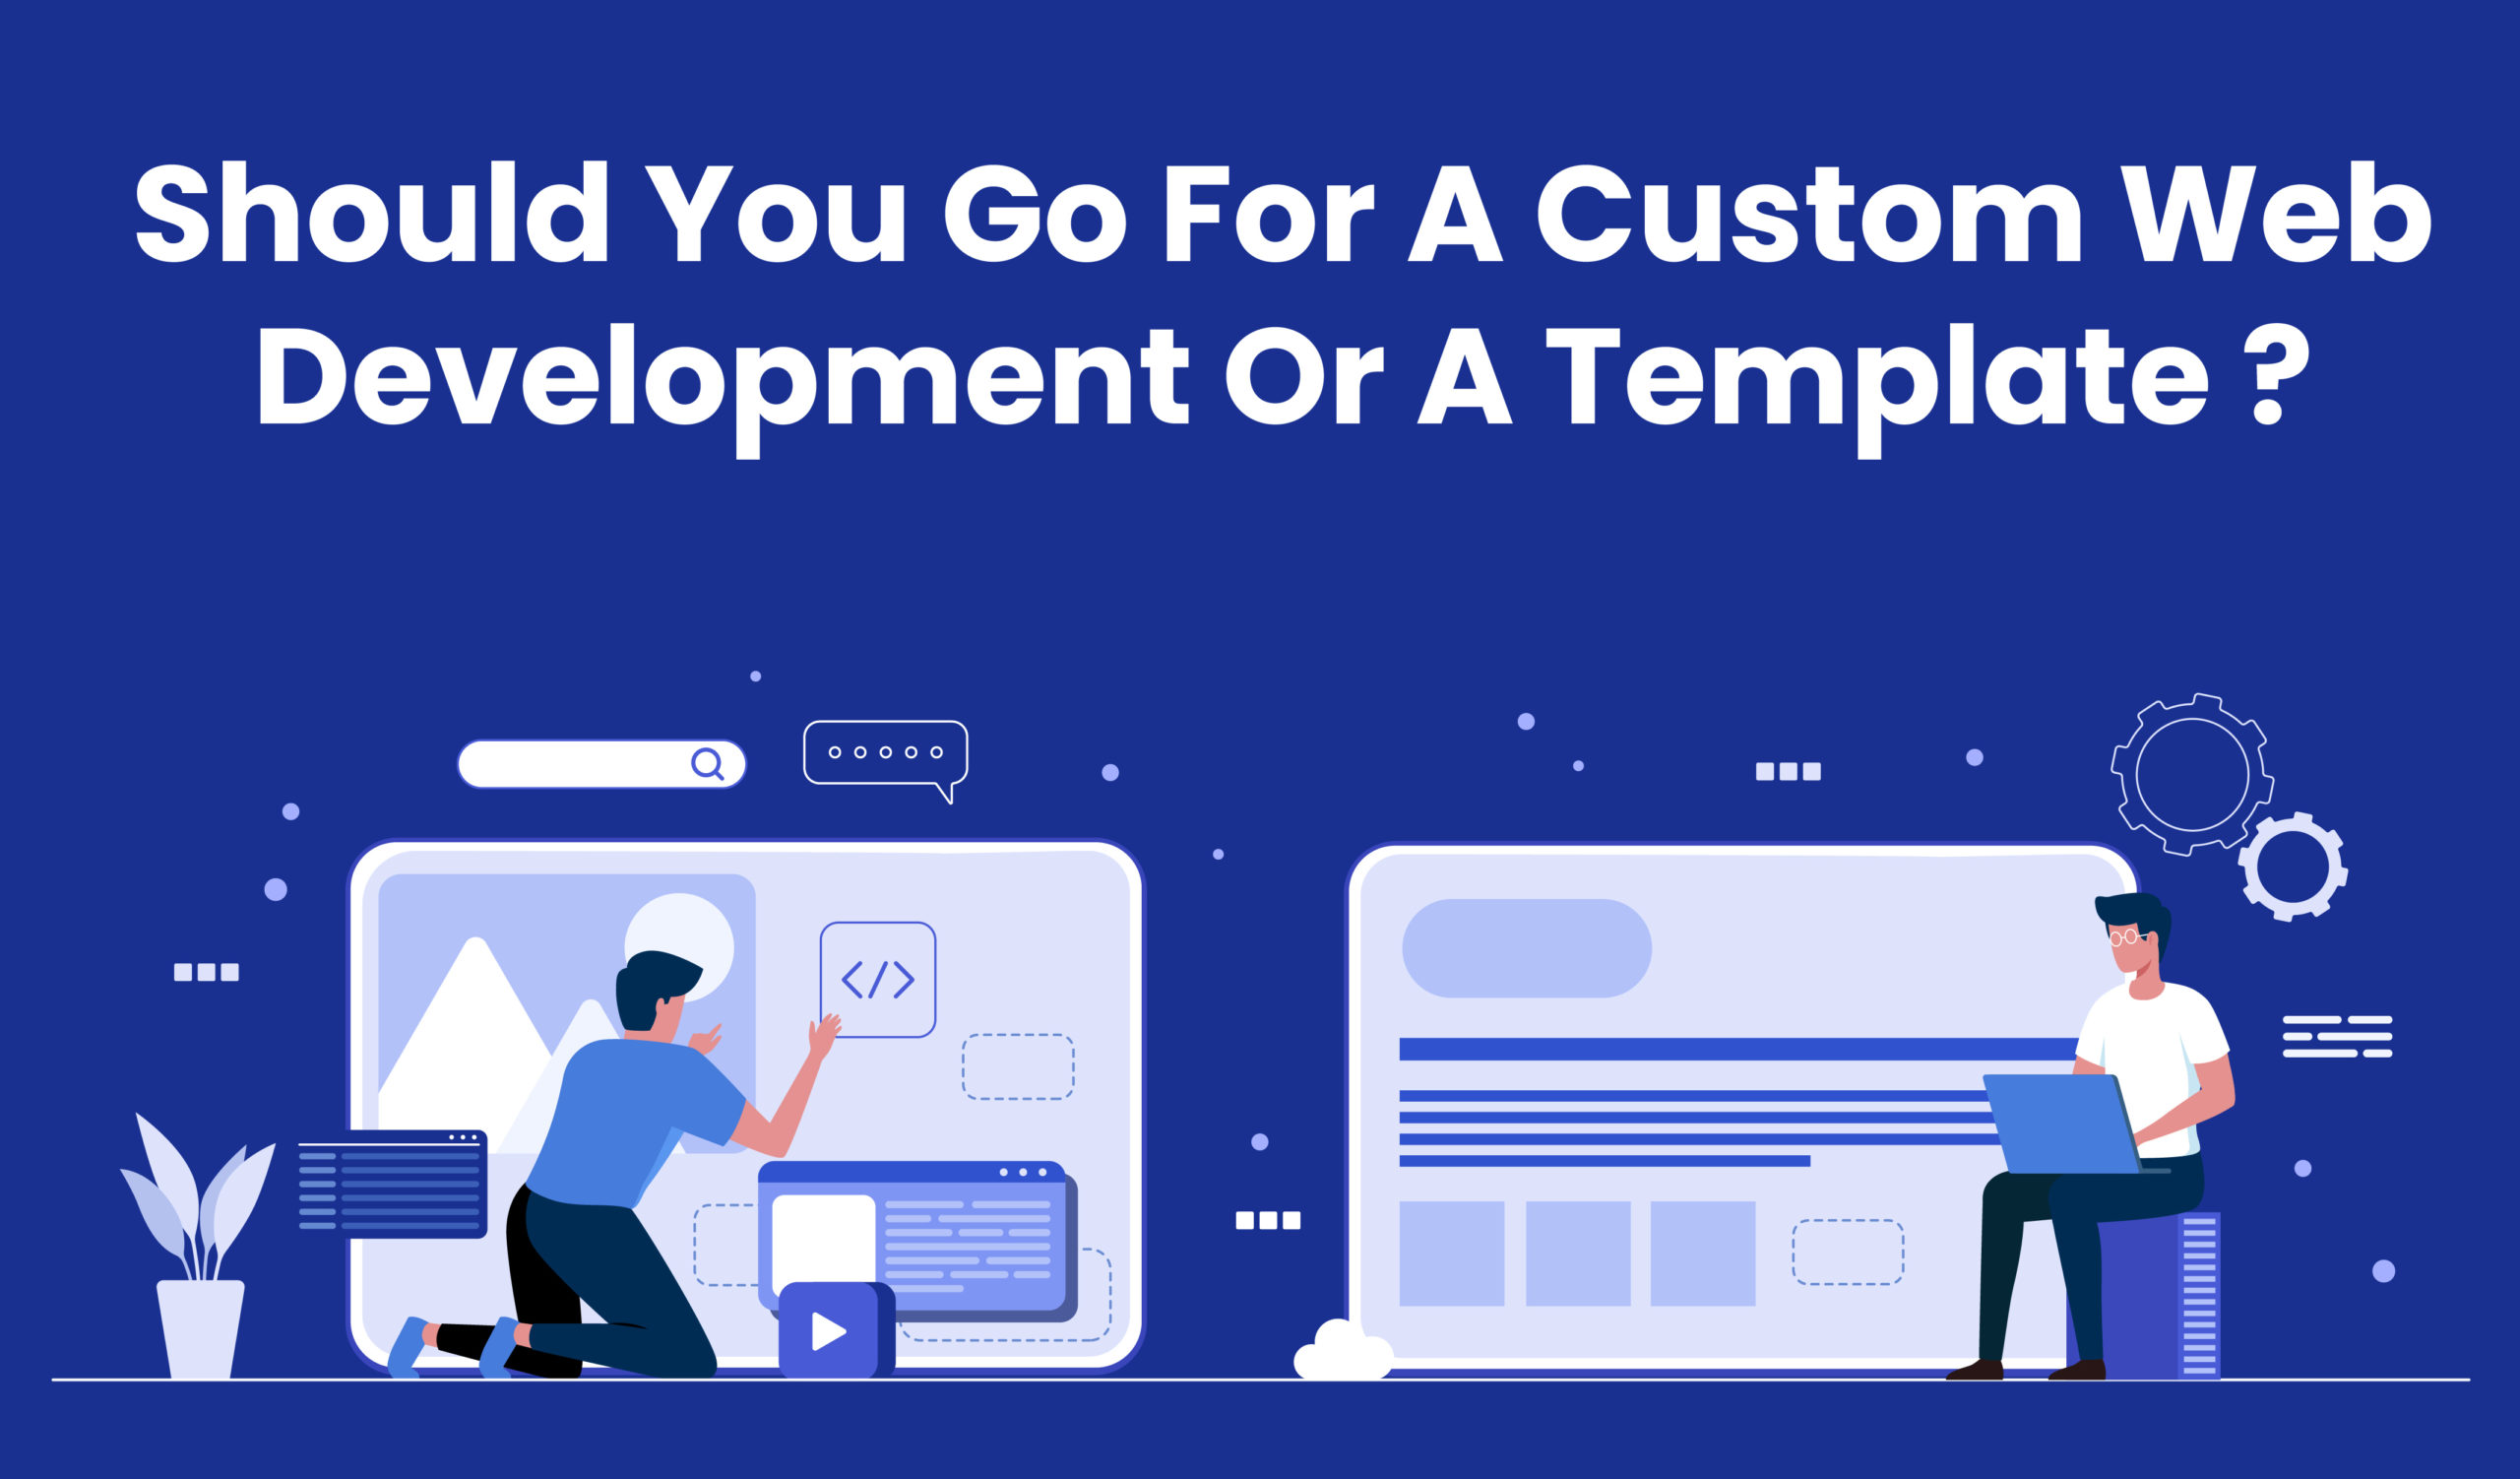 Should you go for a custom web development or a template?